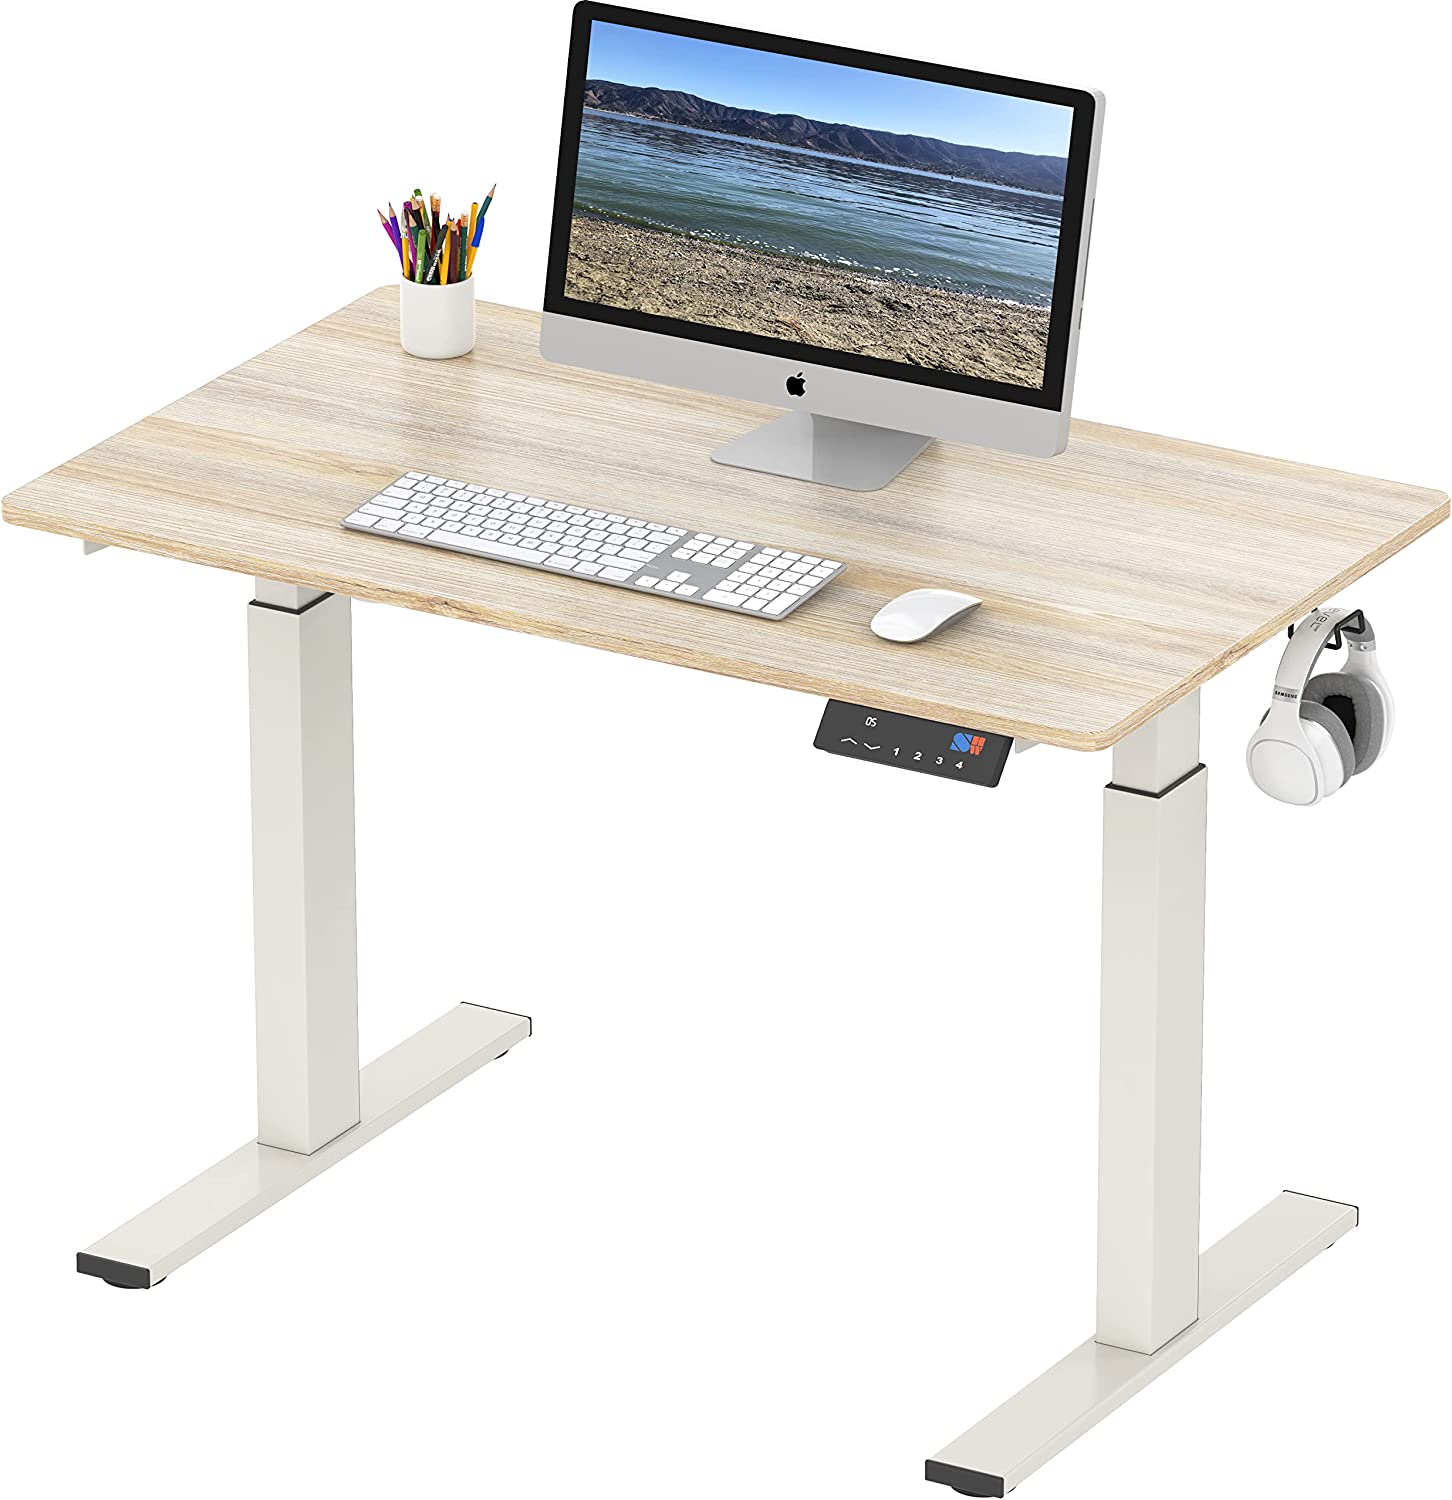 motorized standing desk with a keyboard, mouse, and computer monitor on it, on a white background